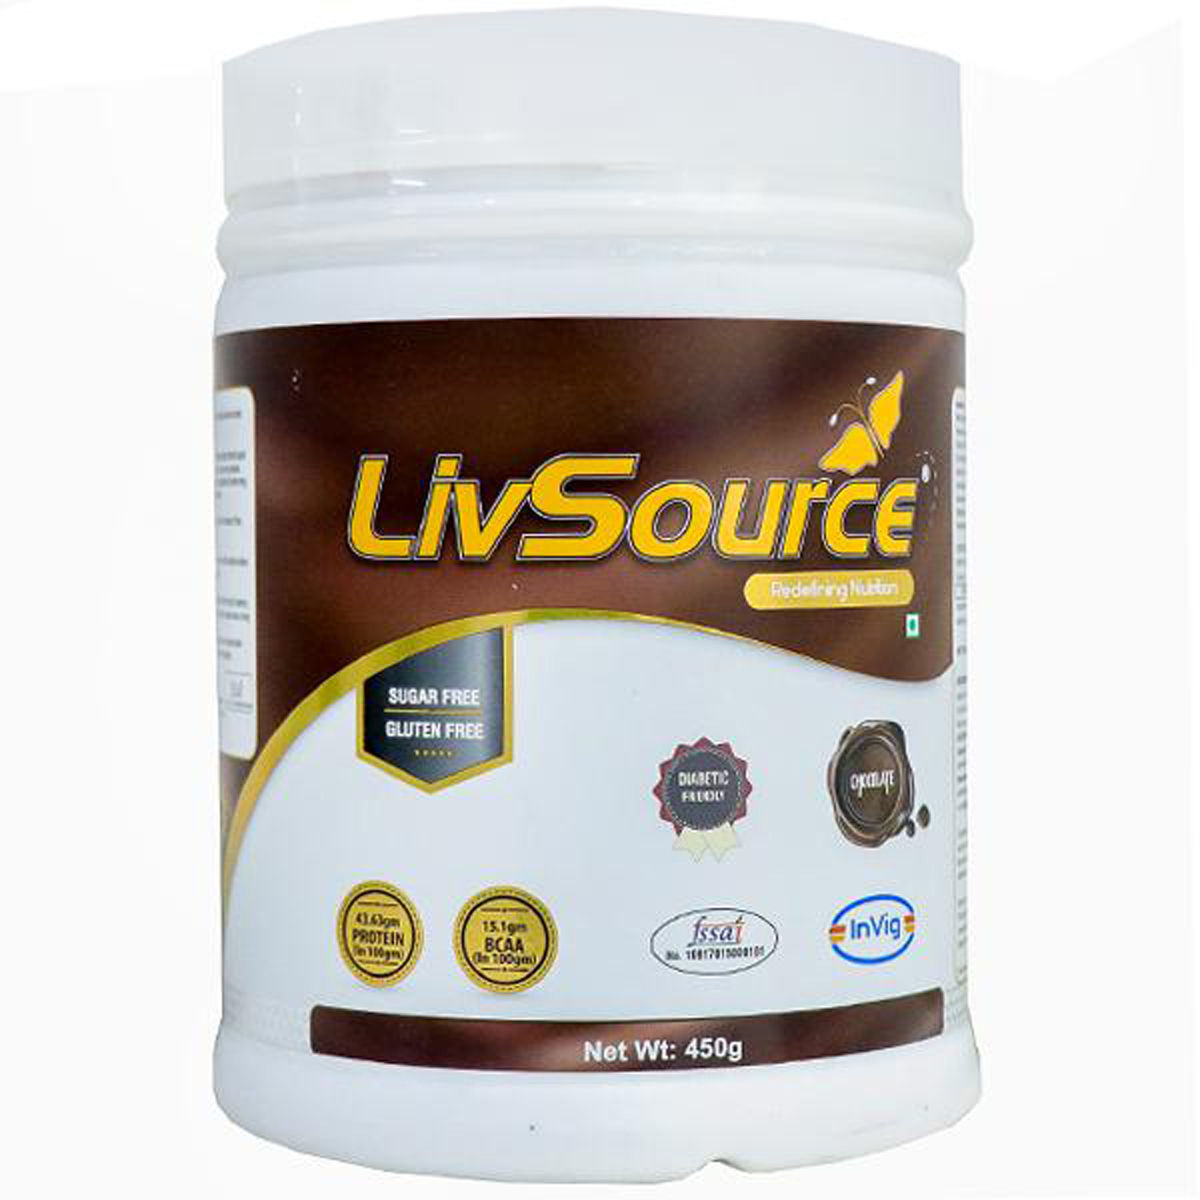 Livsource Sugar Free Chocolate Powder 450 gm Price, Uses, Side Effects